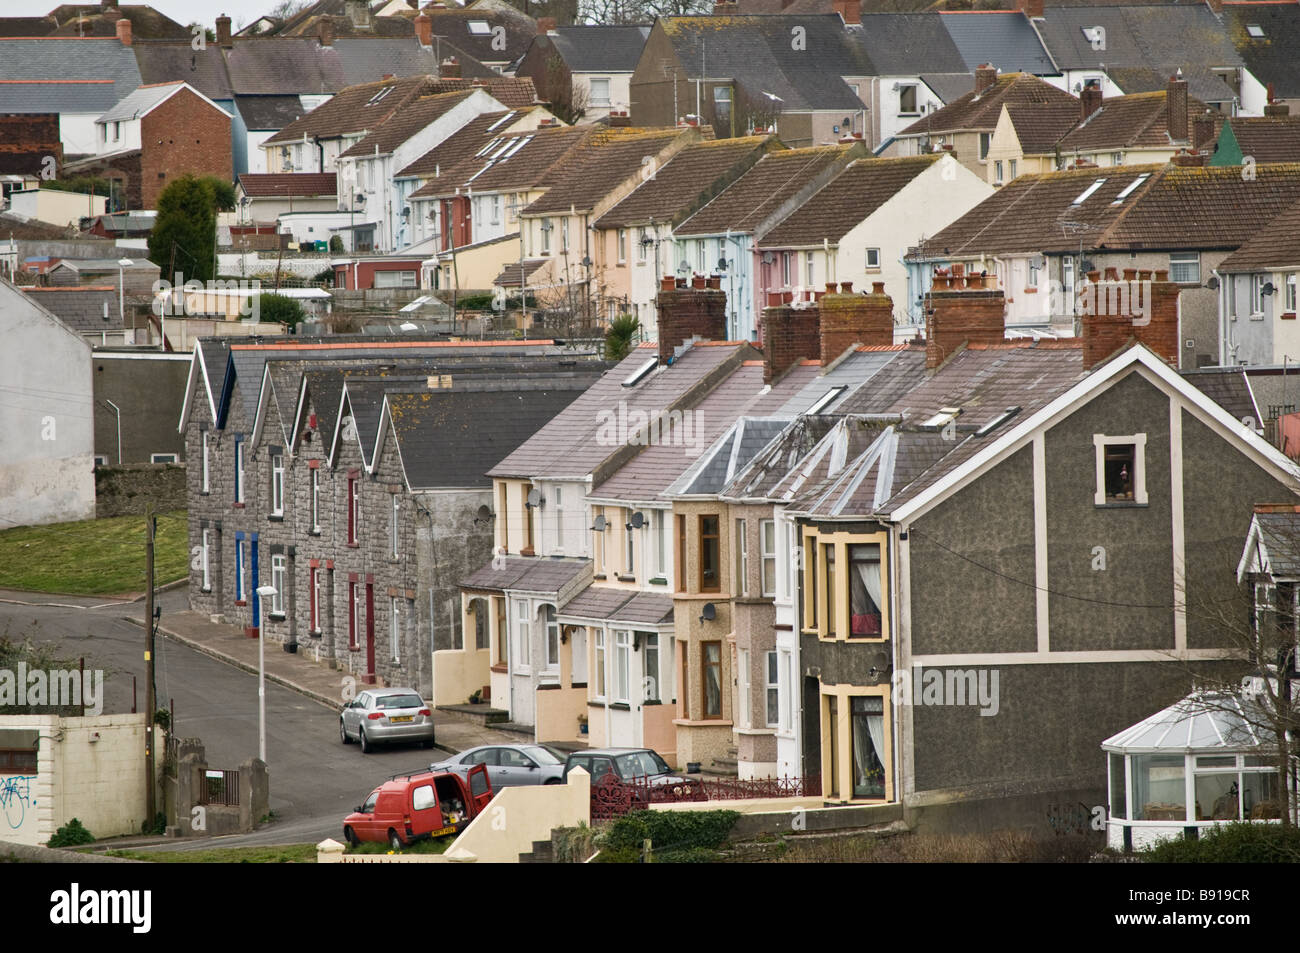 Rows of terraced houses in Milford Haven Pembrokeshire Wales UK Stock Photo